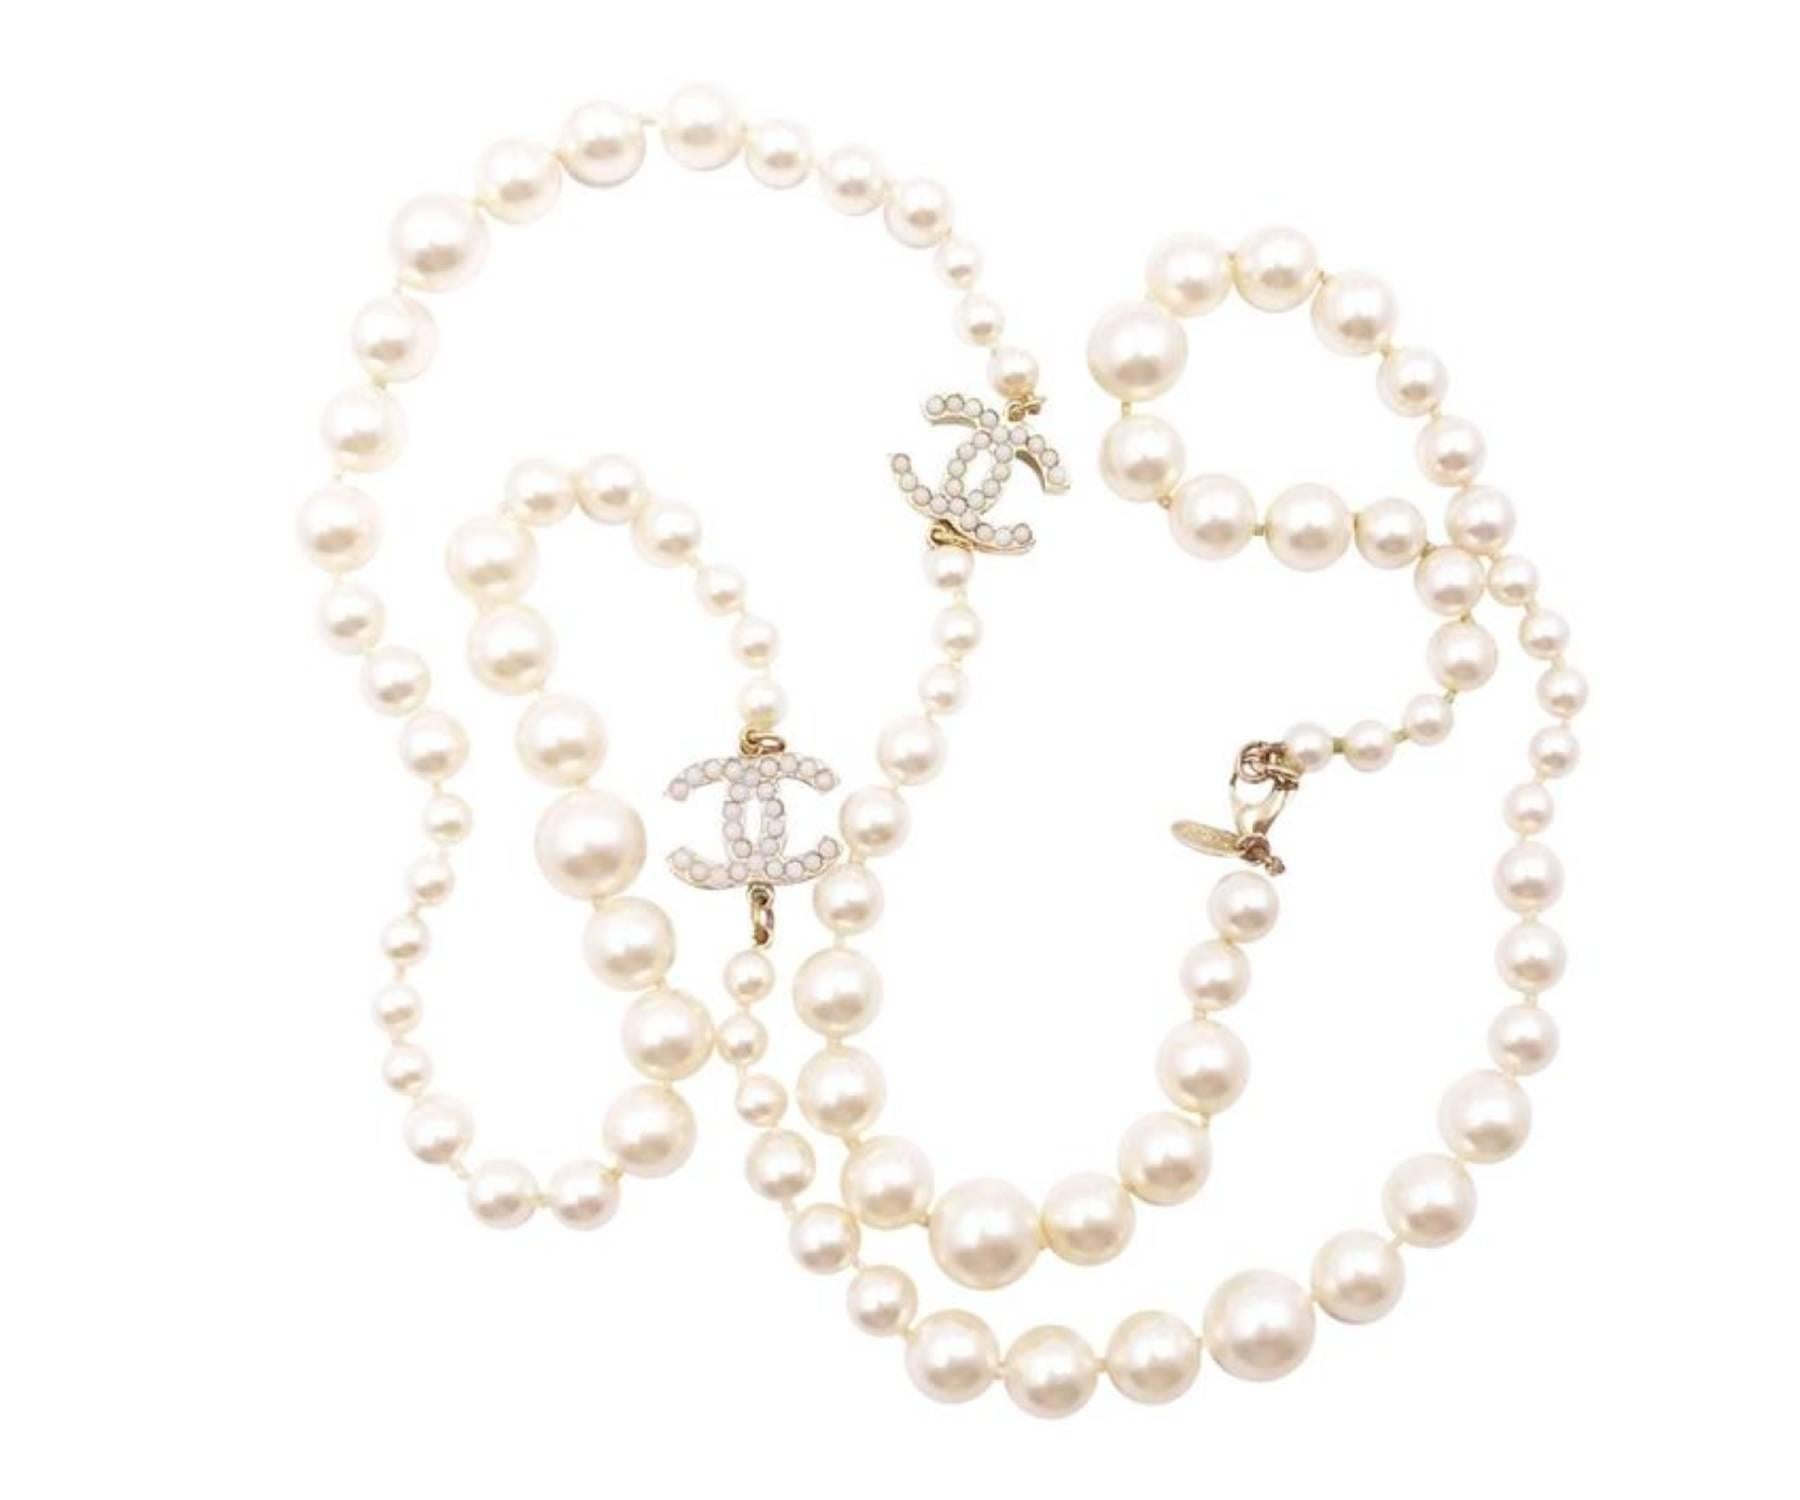 Chanel Classic 2 Gold CC White Bead Pearl Necklace

*Marked 11
*Made in France
*Comes with the original box

-It is approximately 34